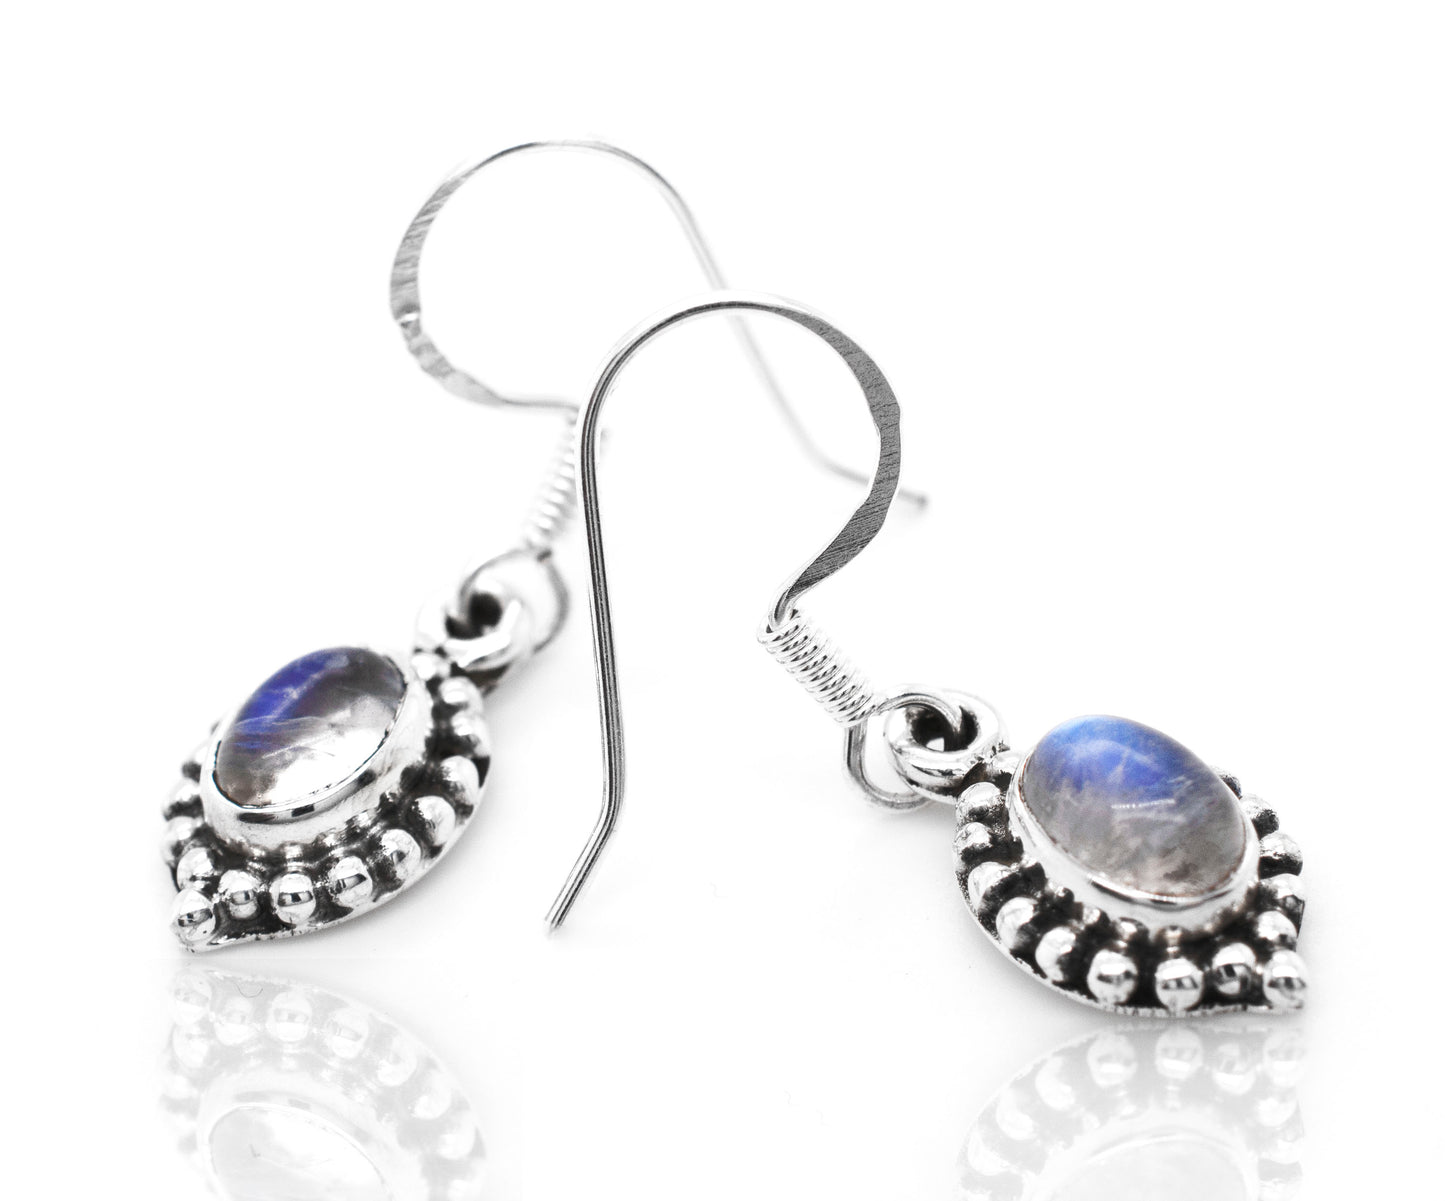 A pair of Super Silver's Dainty Moonstone Earring With Beaded Border.